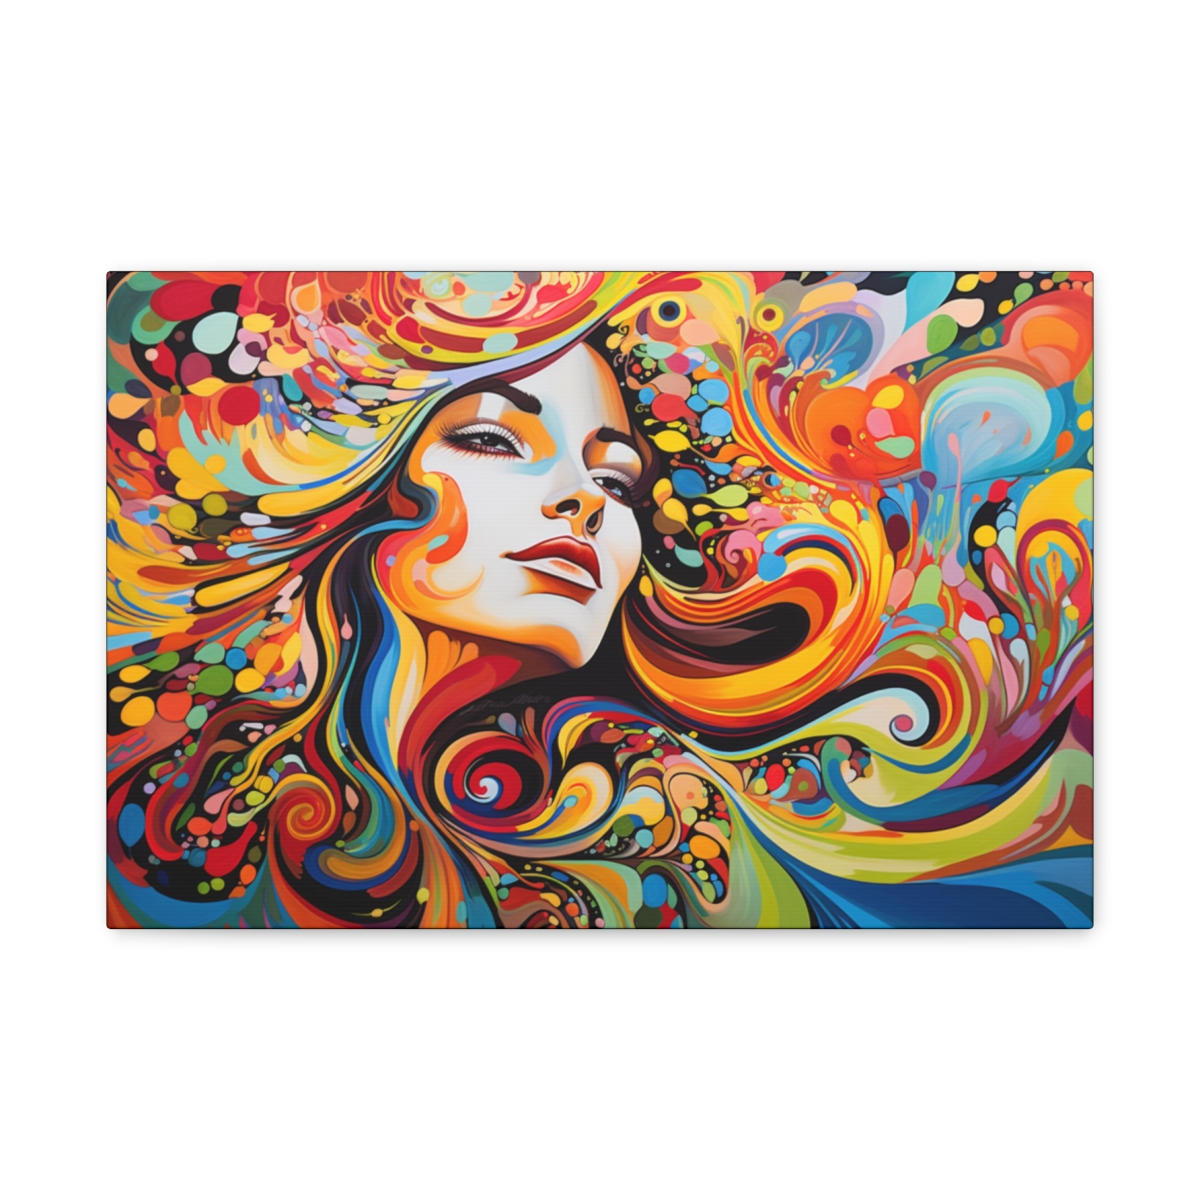 Hippie Girl Psychedelic Art Canvas Print: Embrace The Cosmos